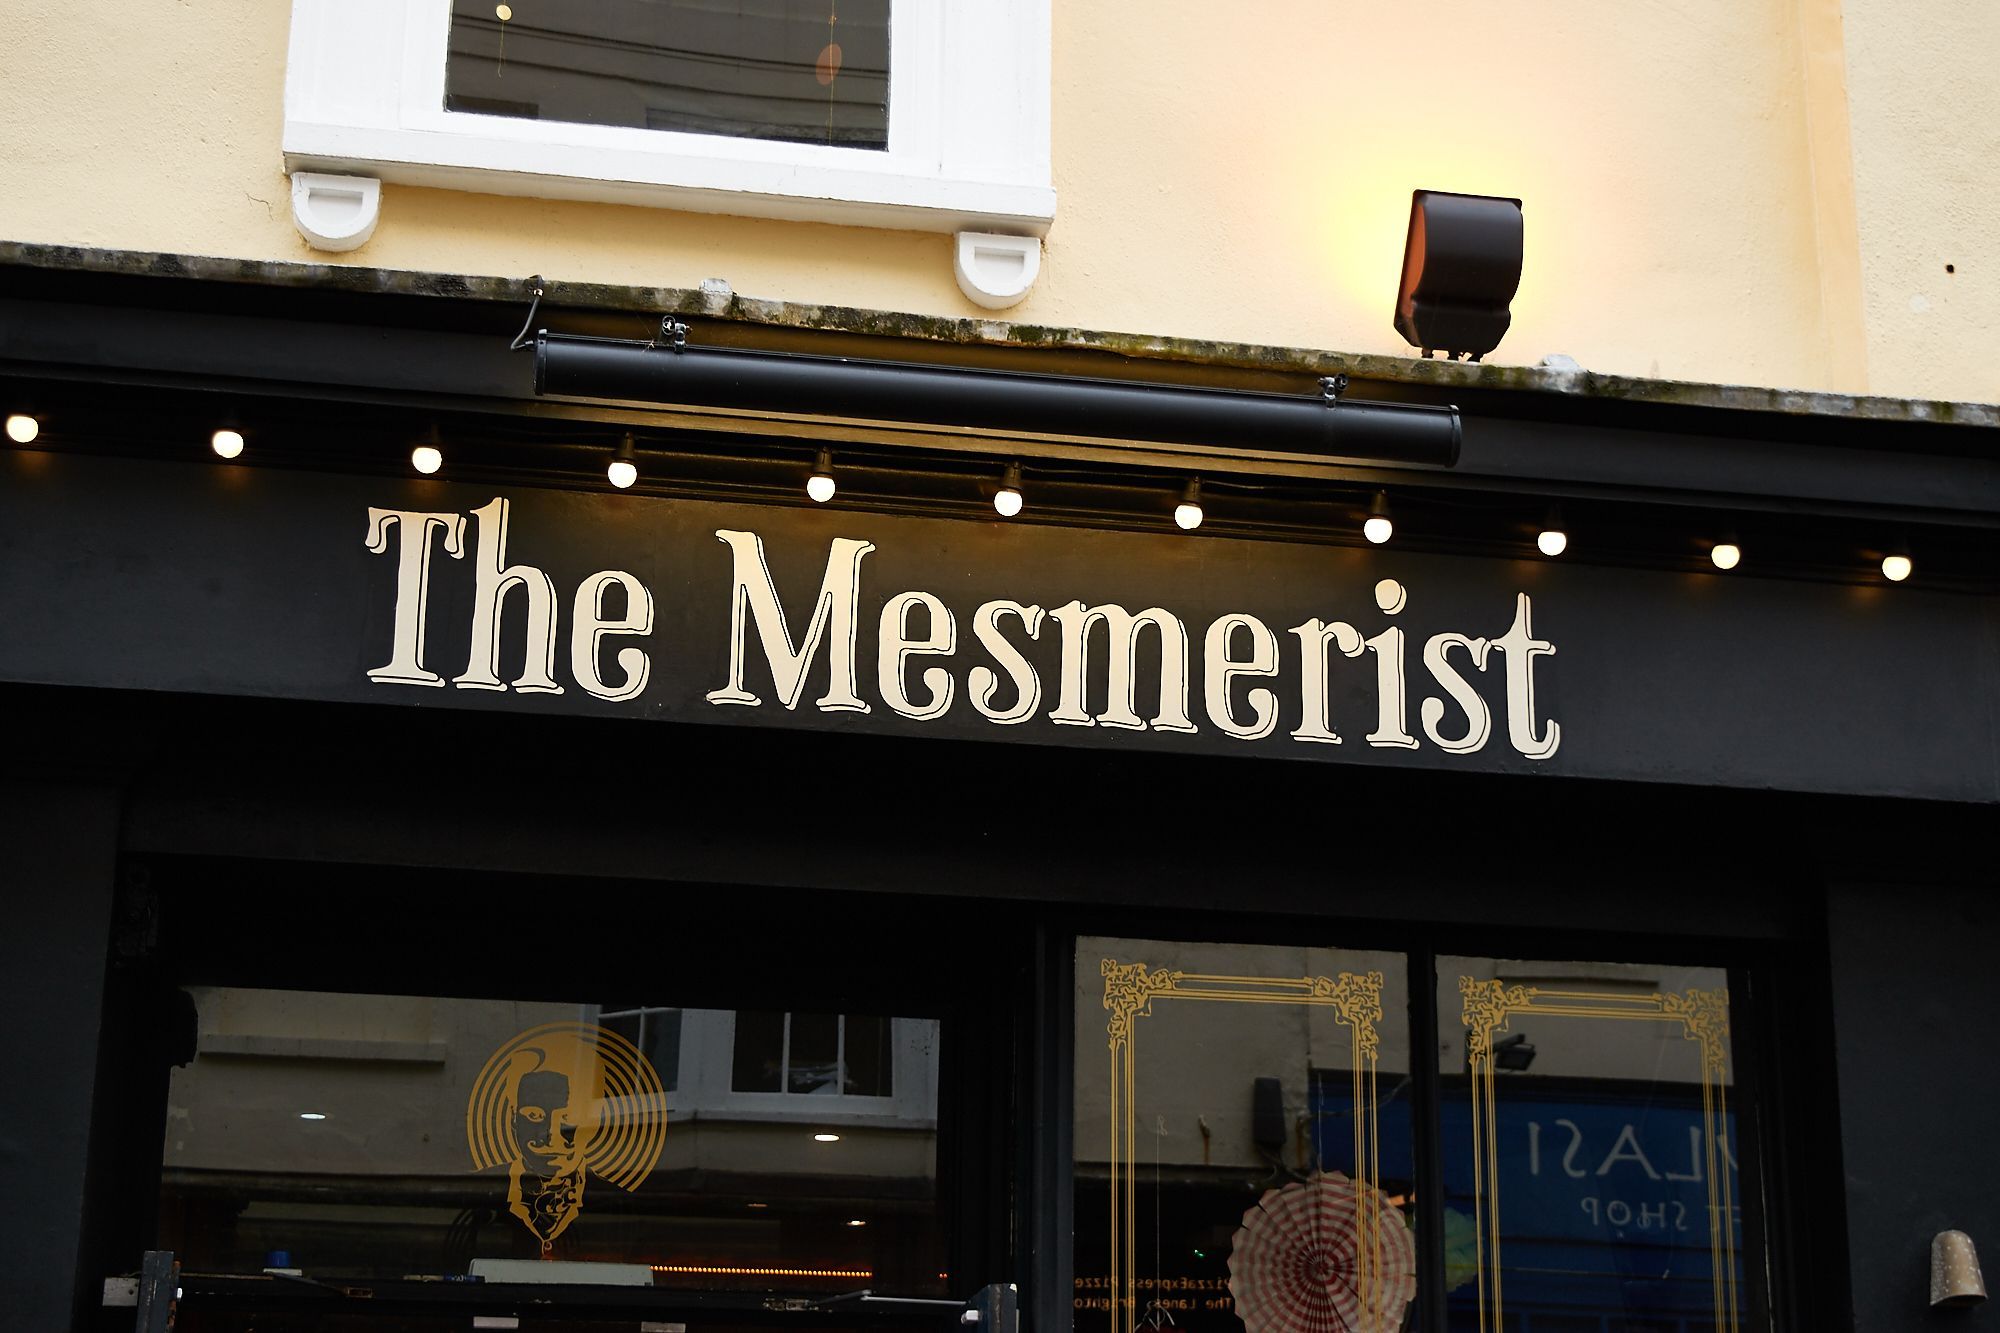 The Mesmerist exterior shot of the venue name written on black wall